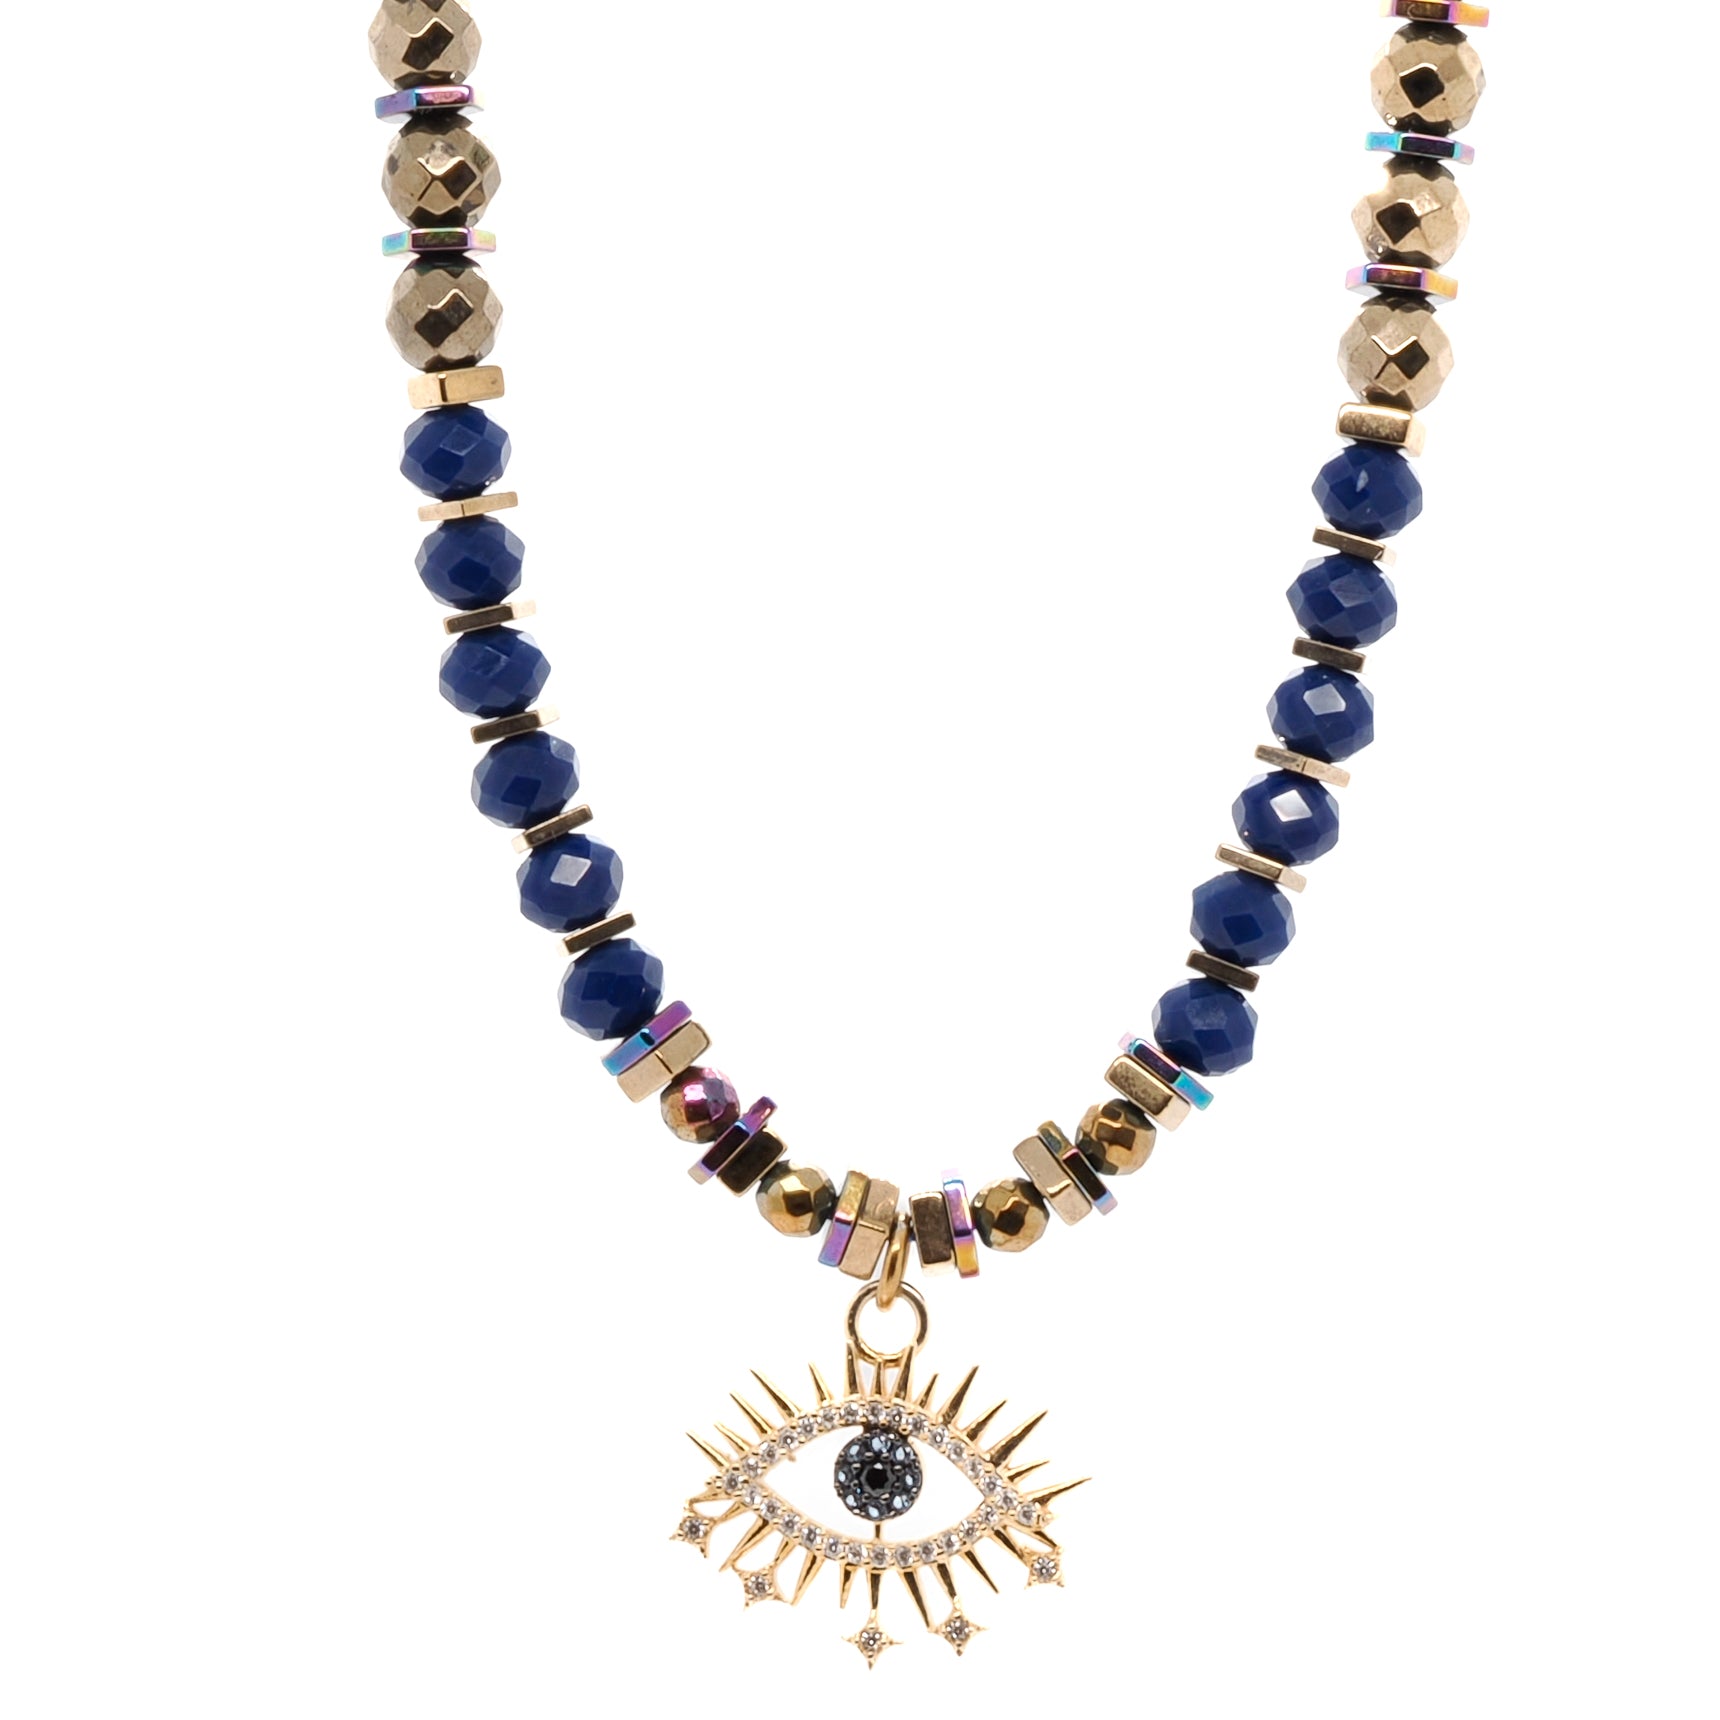 Blue Evil Eye Necklace with Sparkling Zirconia Pendant for Stylish Protection